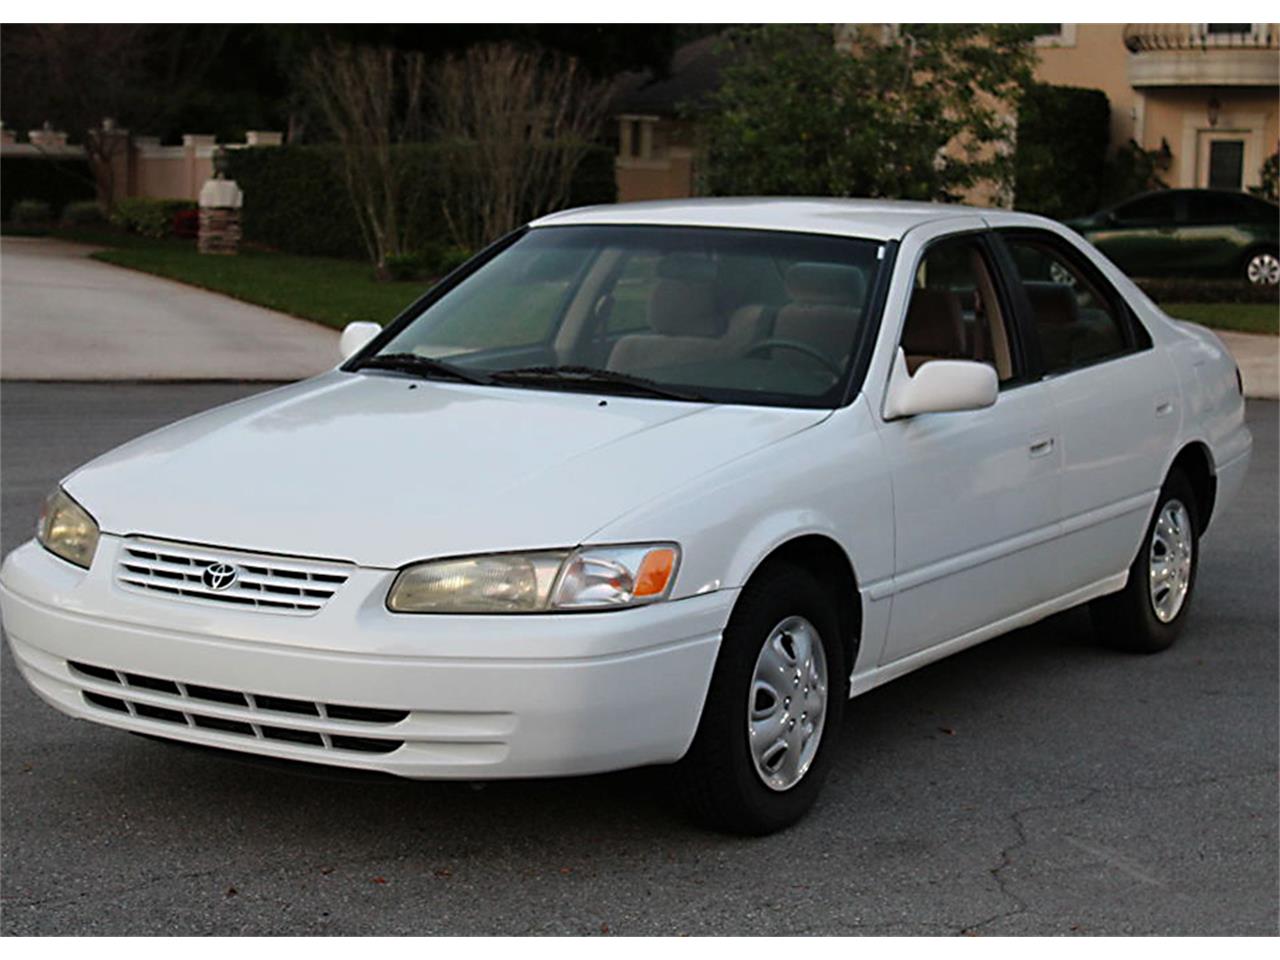 1999 Toyota Camry for sale in Lakeland, FL – photo 71